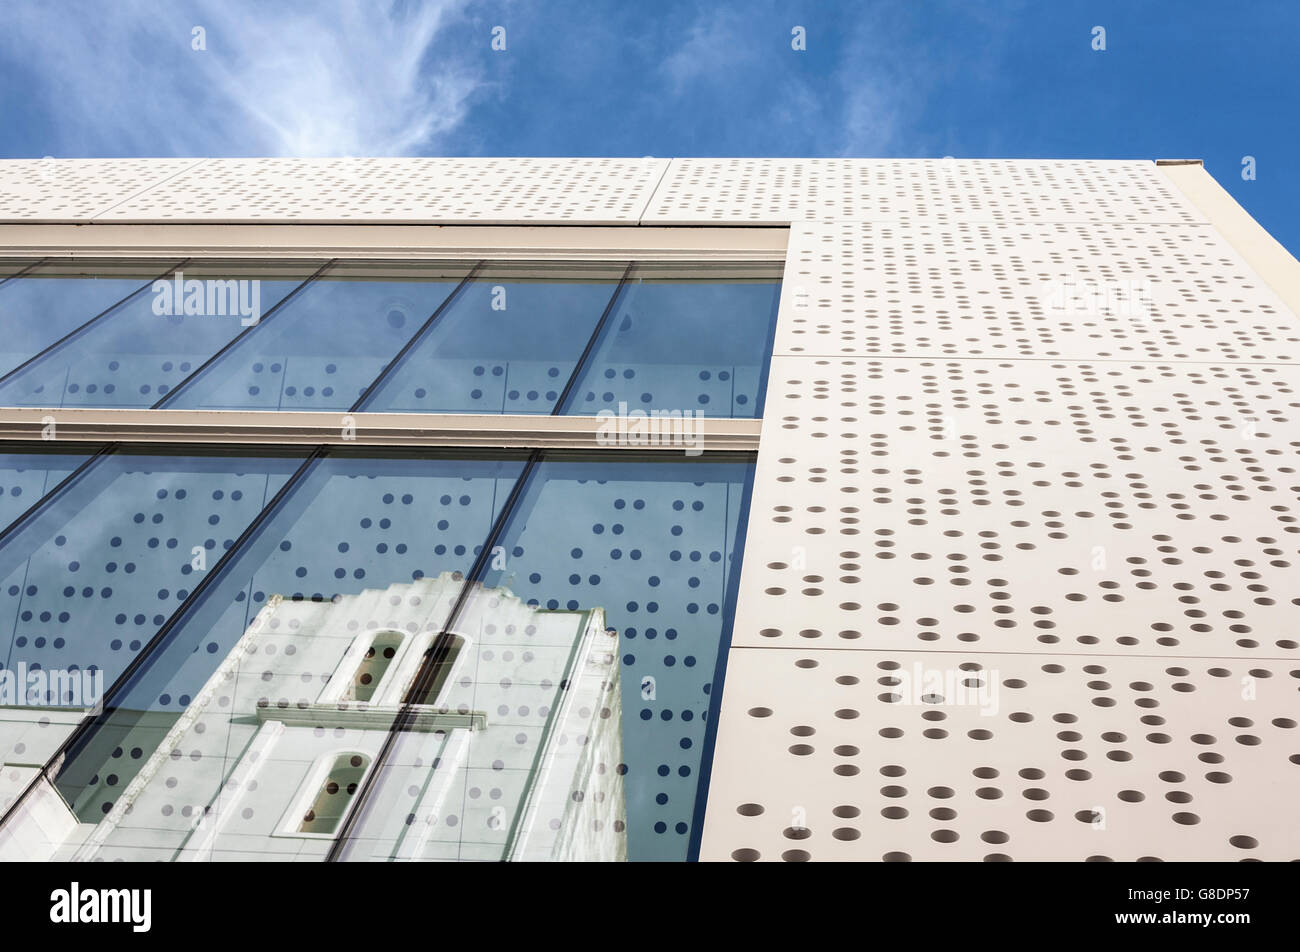 Badajoz, Spain - June 19, 2016: MUBA Museum building. Prestressed cement skin and perforated white with reflections Stock Photo